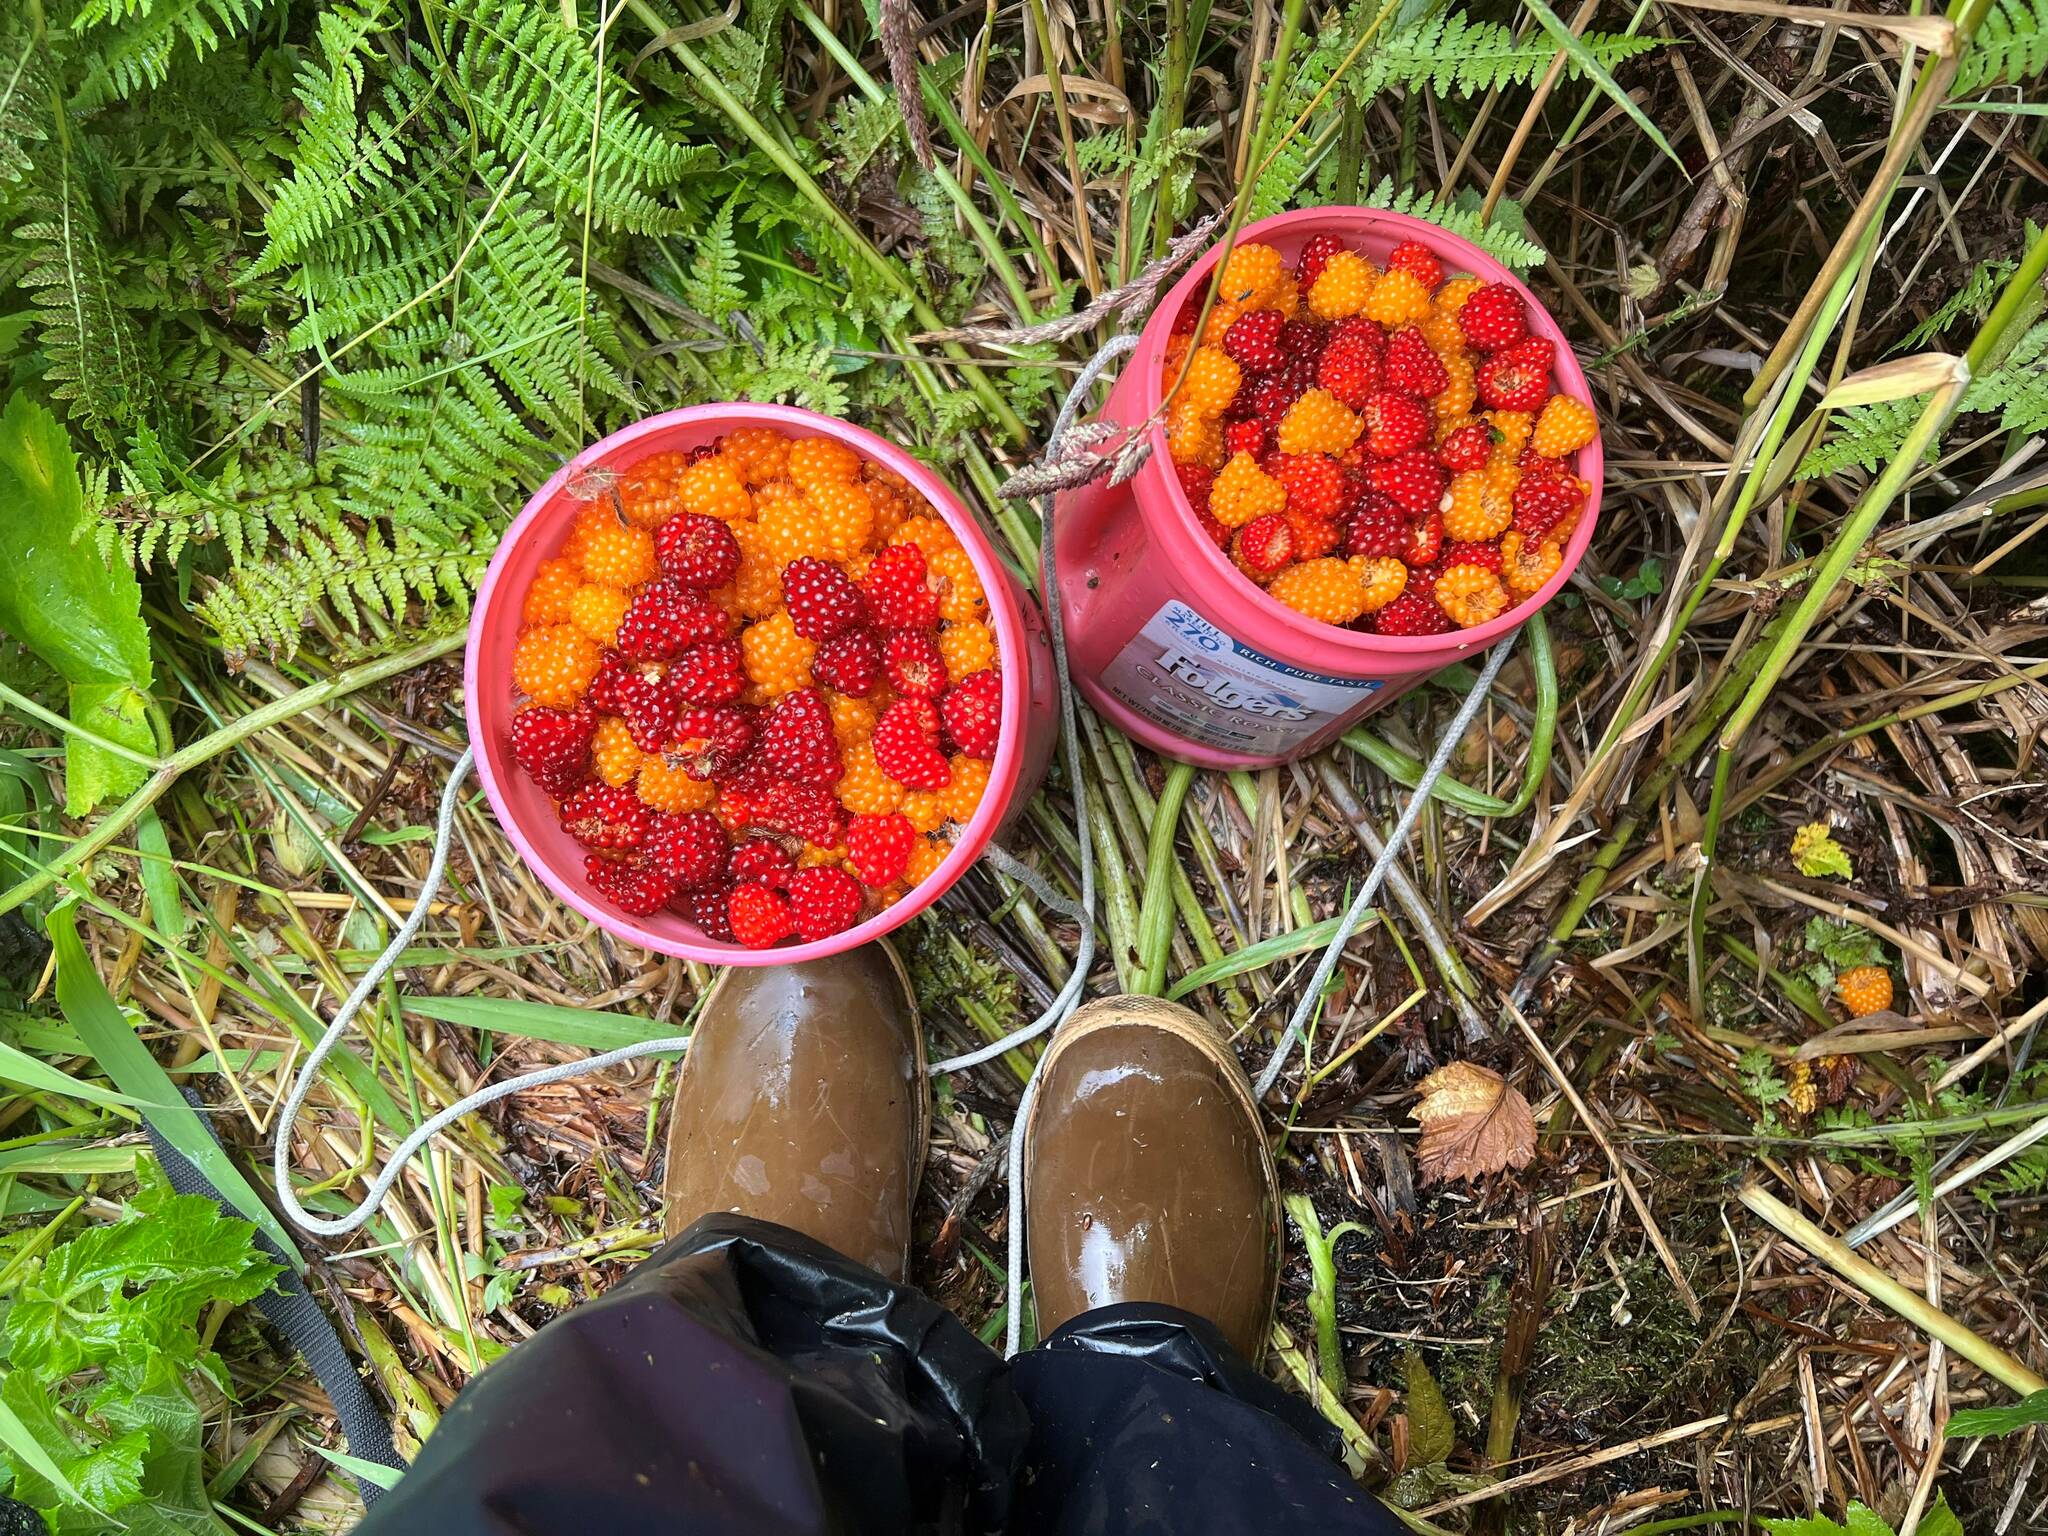 Boots and buckets and salmonberries in Wrangell. (Courtesy Photo / Vivian Faith Prescott)